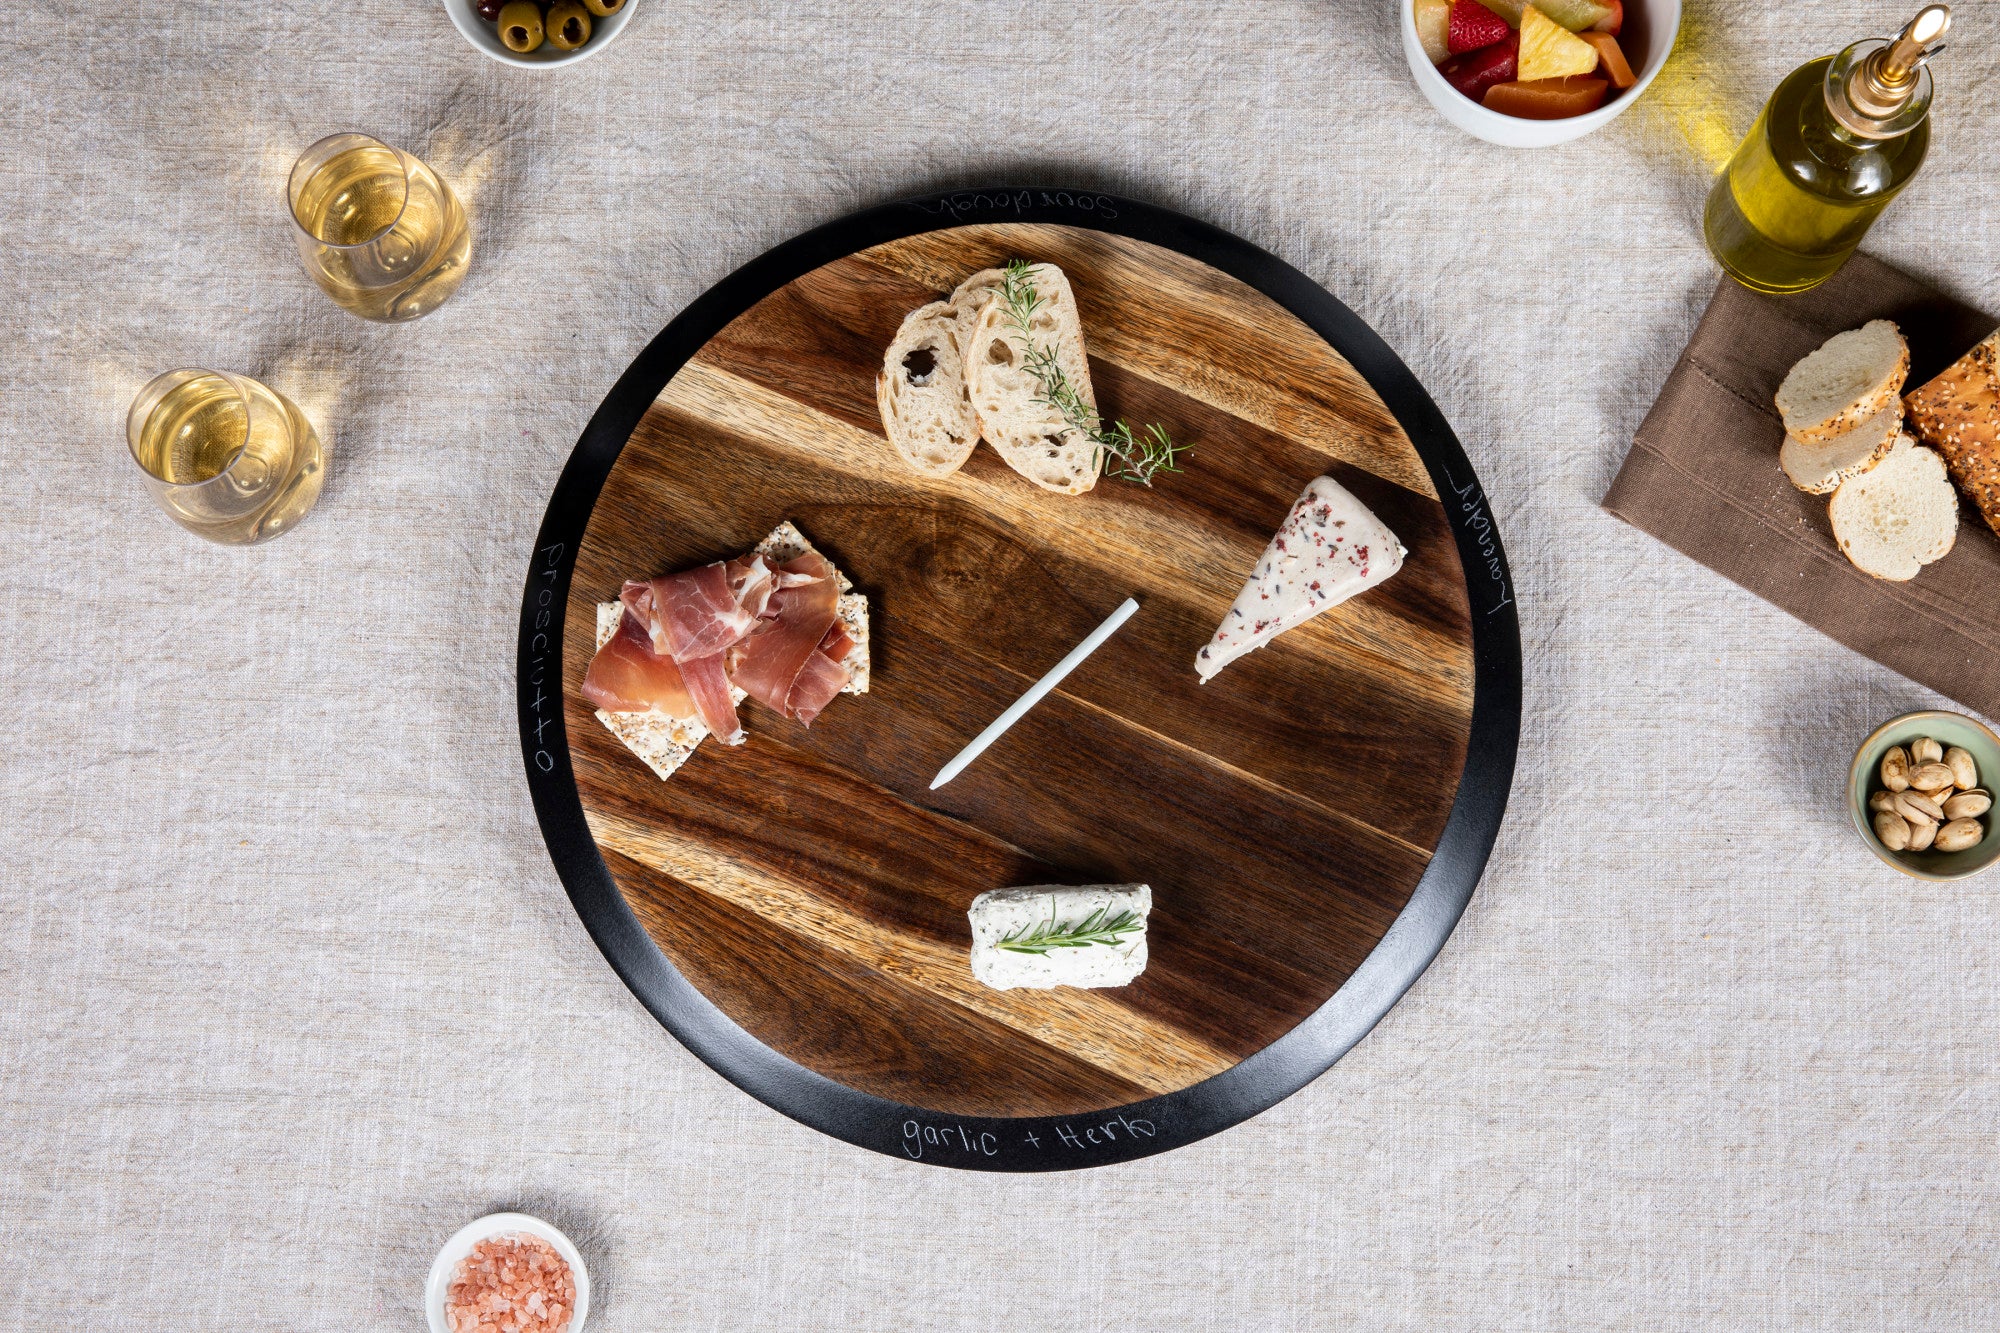 San Diego Padres - Lazy Susan Serving Tray